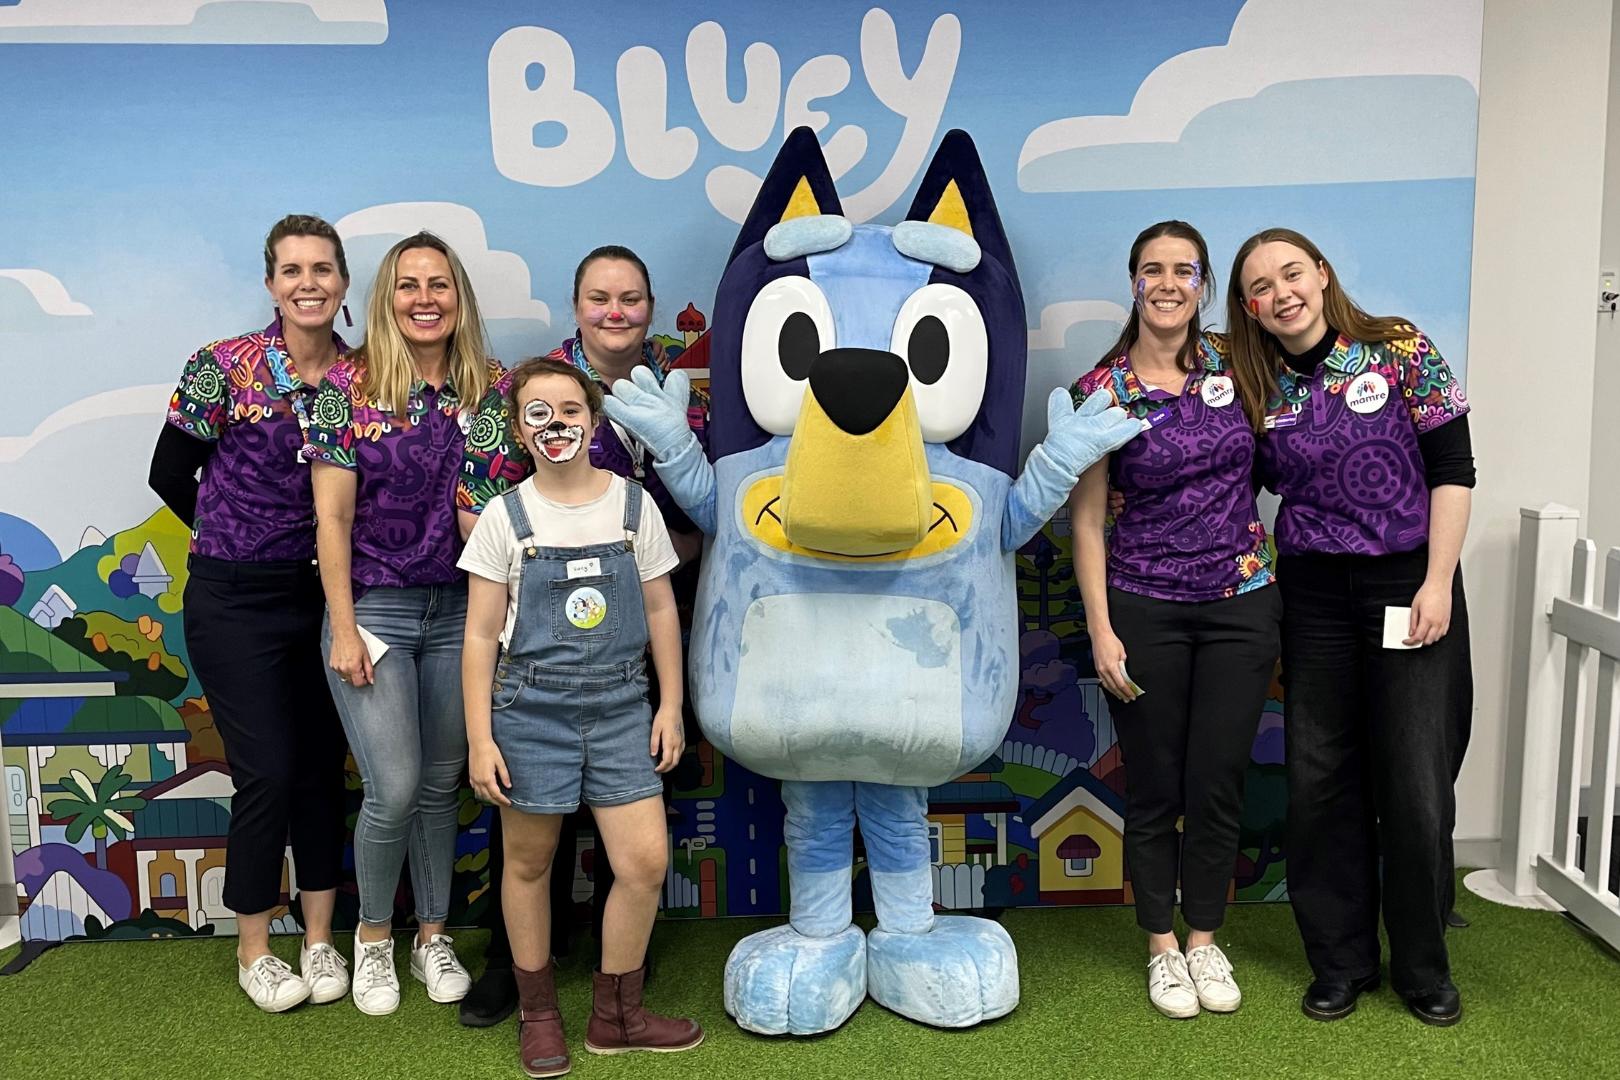 Mamre staff members and a young girl group around Bluey for a group photo